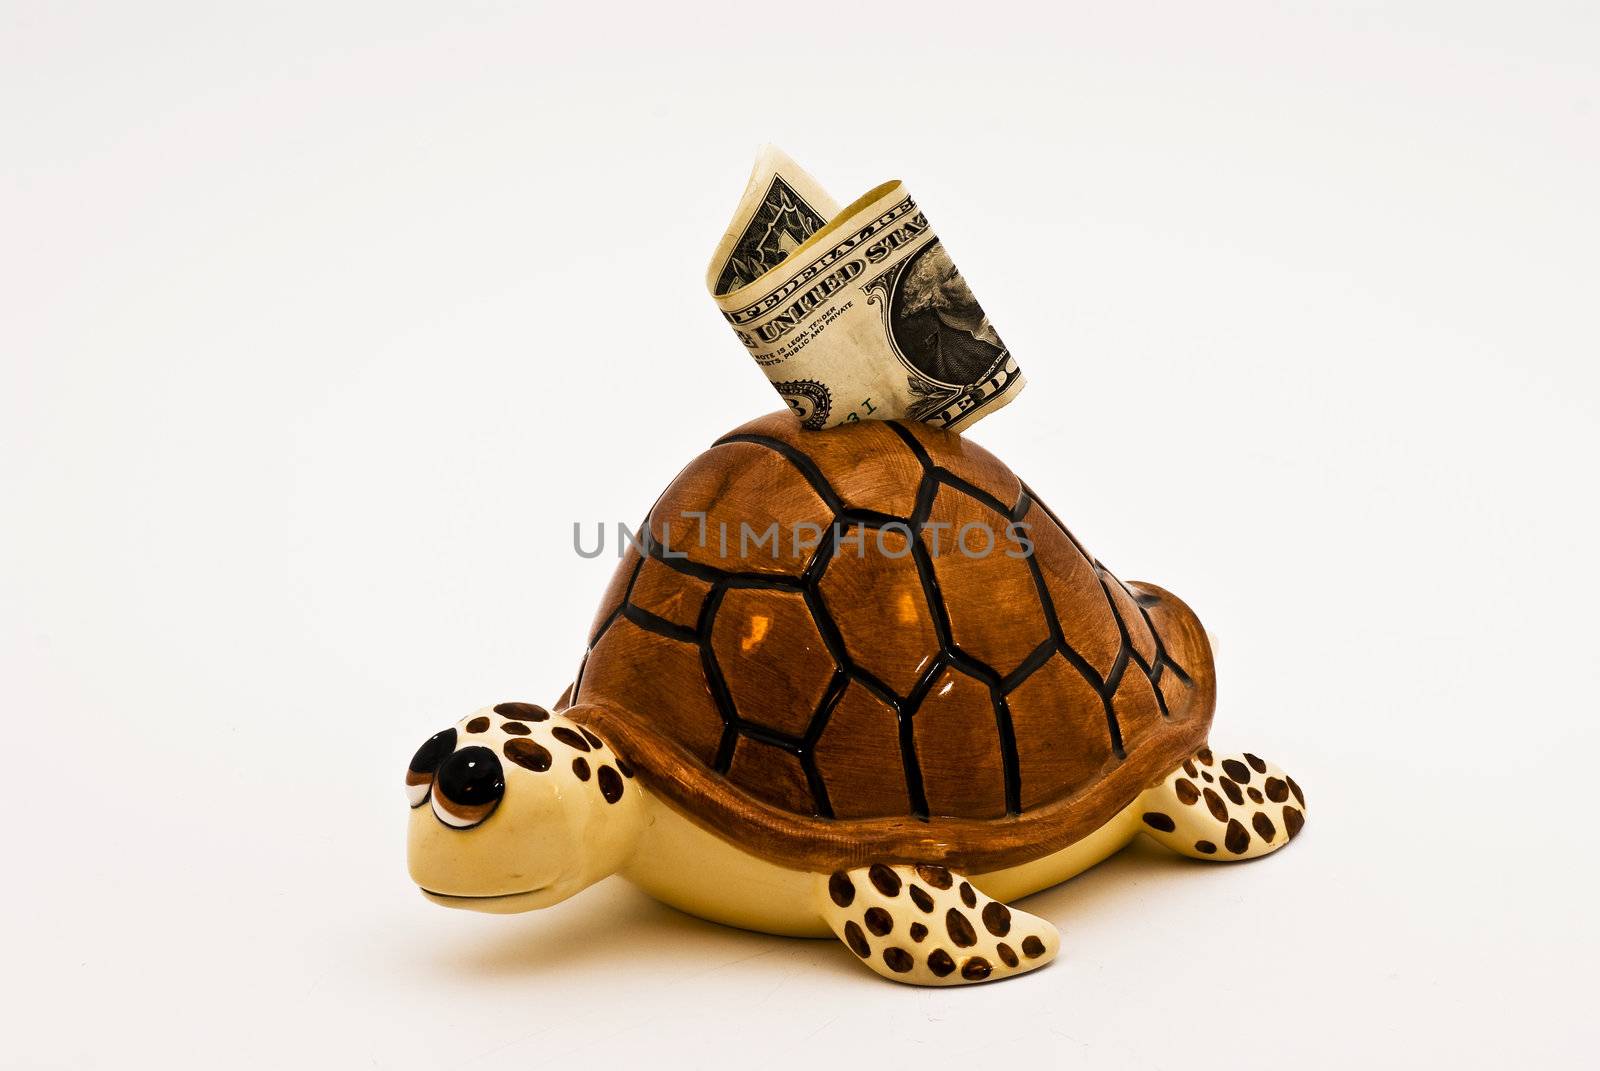 A piggybank in the shape of a turtle on white background